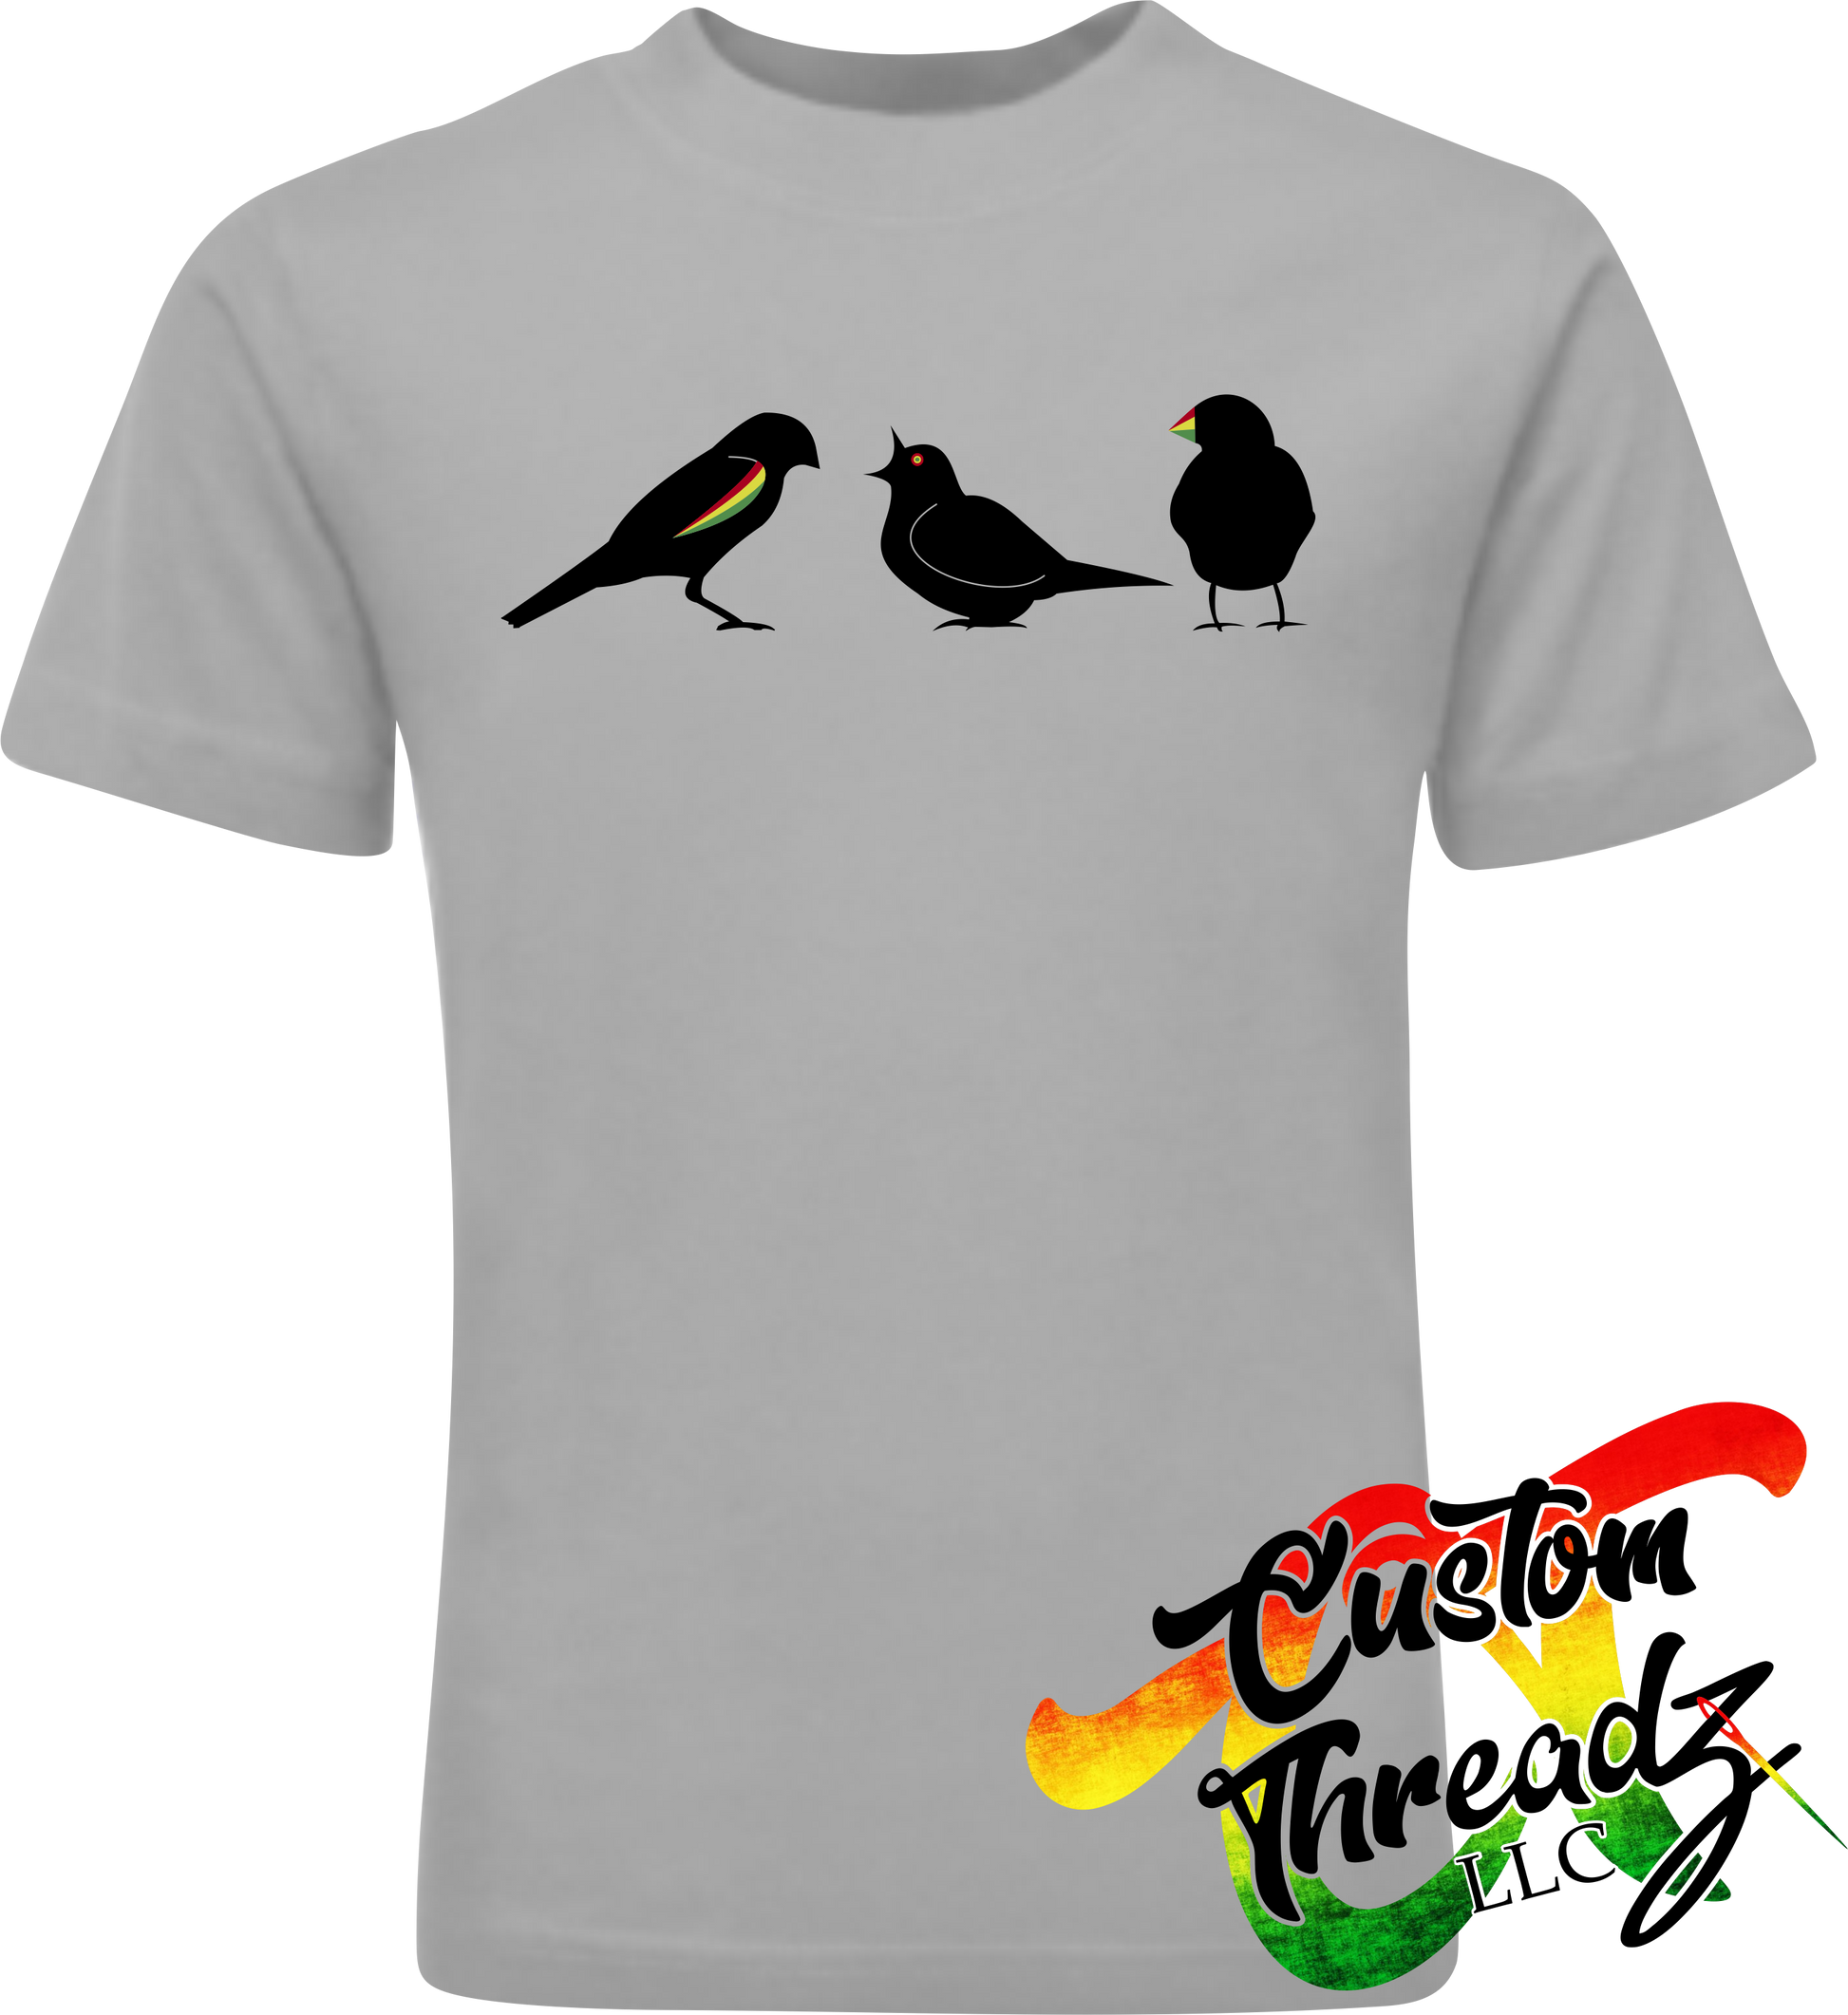 silver tee with three little birds DTG printed design